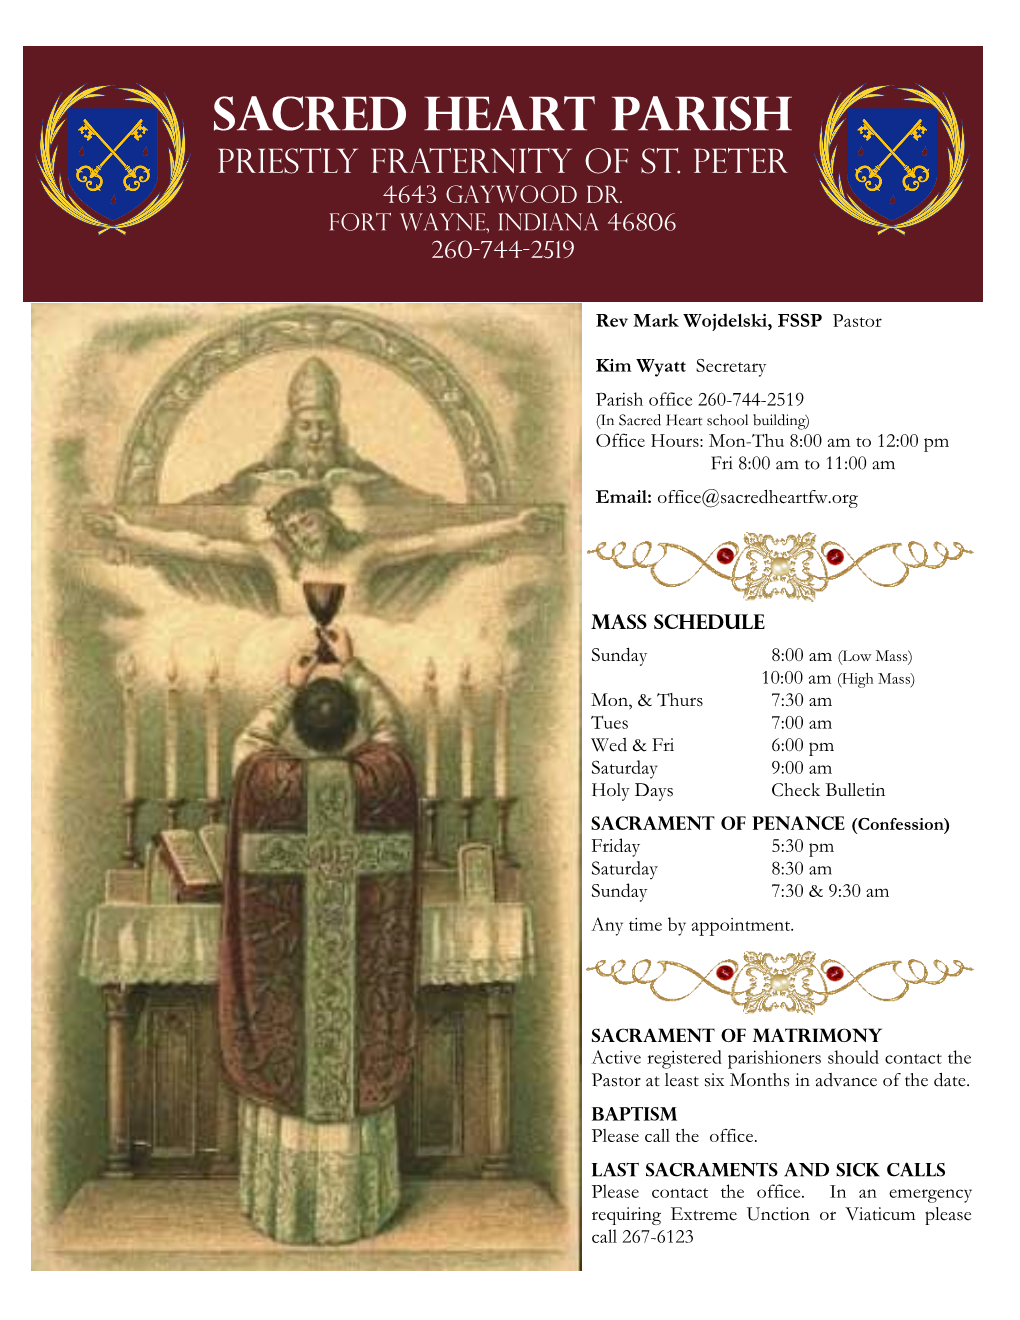 Sacred Heart Parish Priestly Fraternity of St